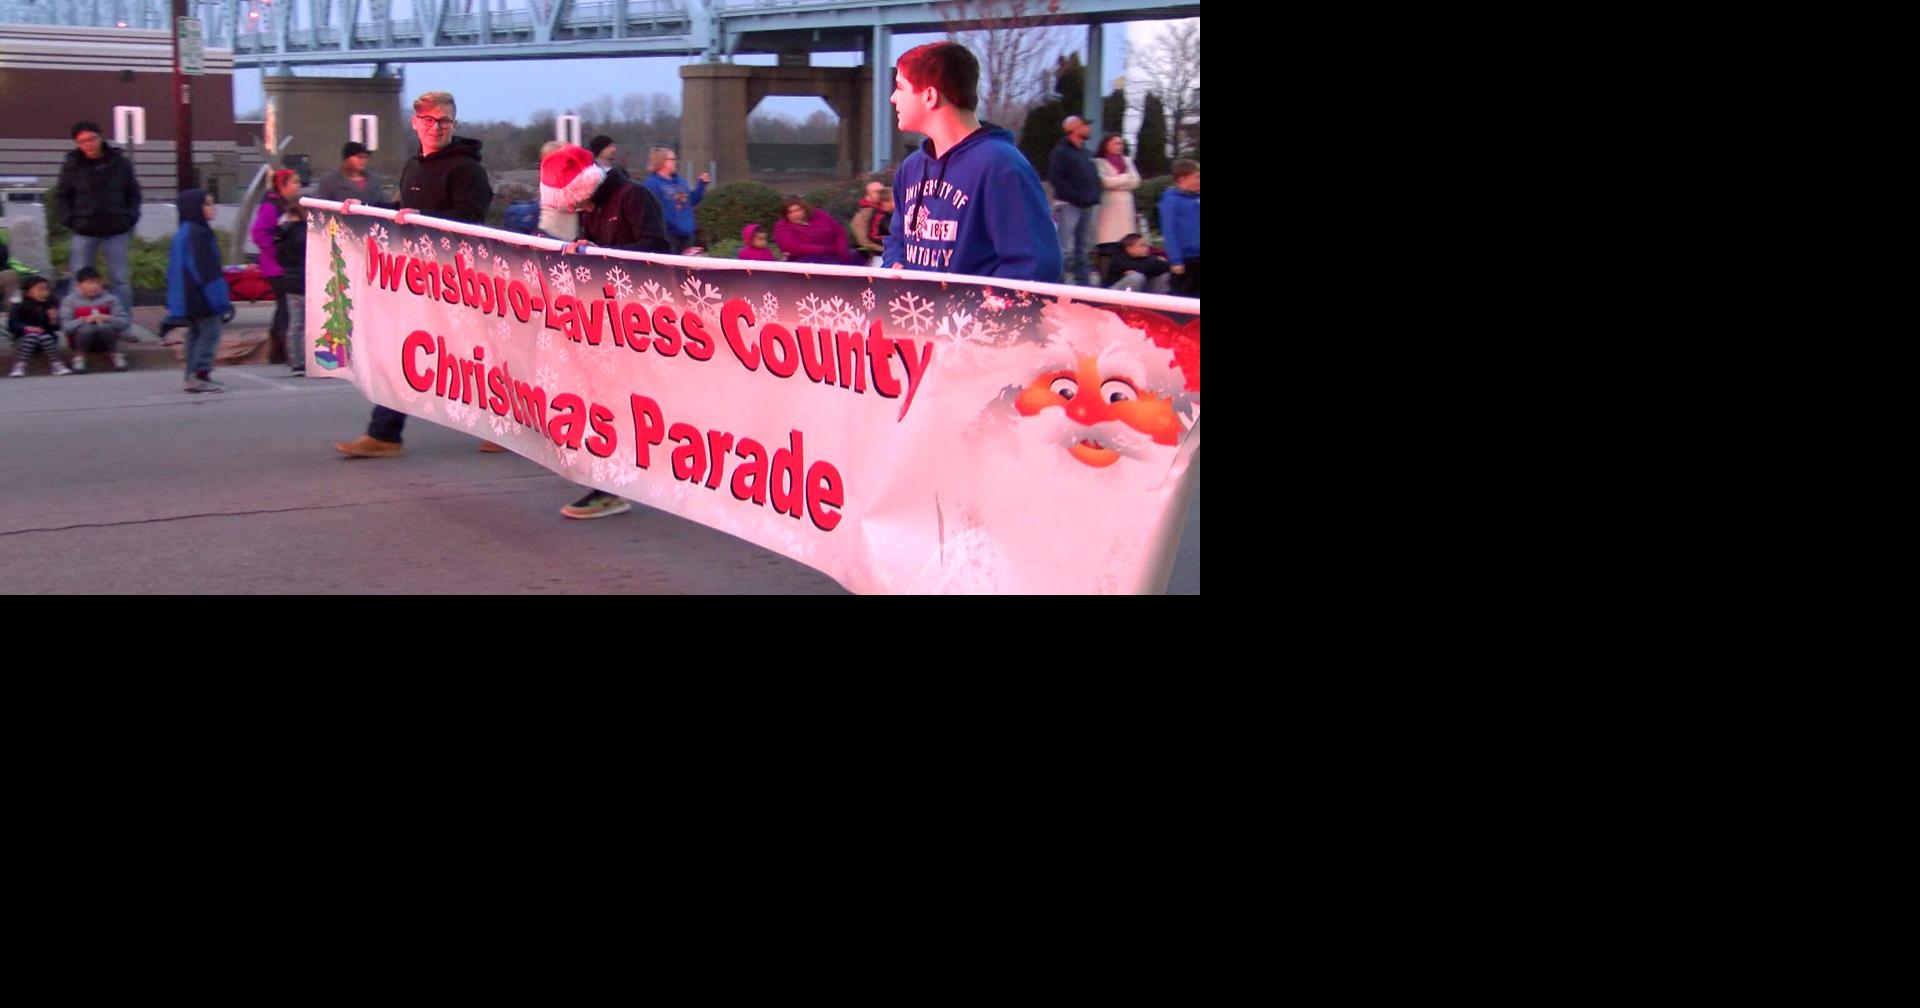 Organizations encouraged to sign up for Owensboro Christmas Parade as